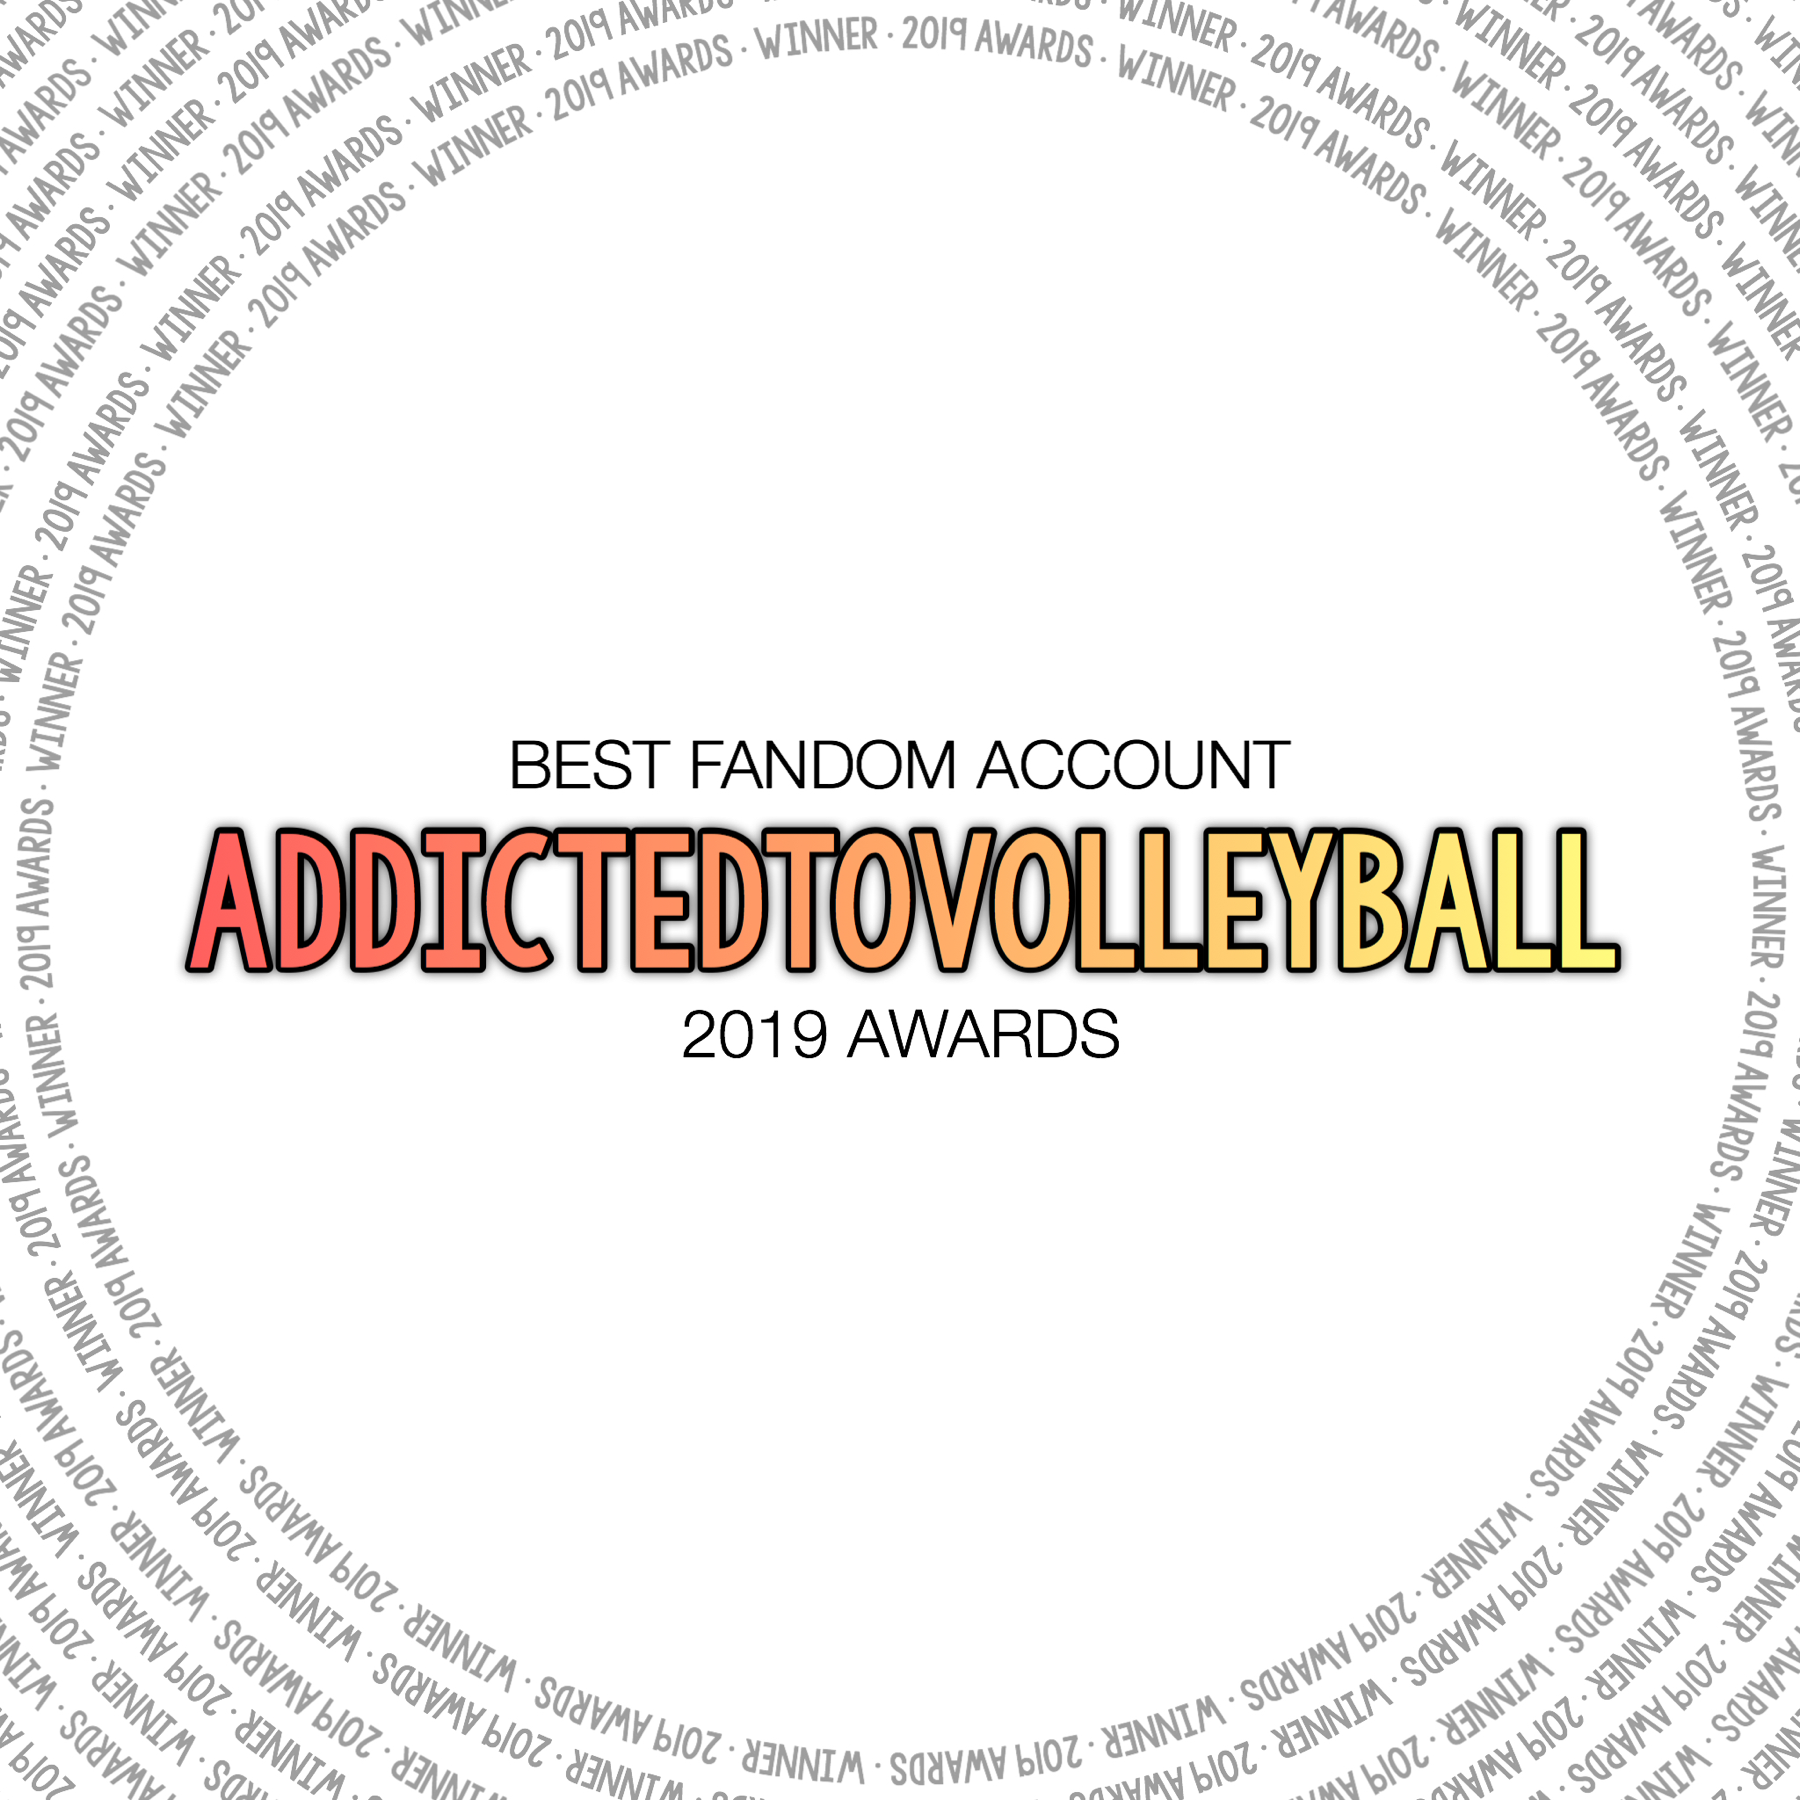 Congratulations @addictedtovolleyball!

The vote count will be in the remixes